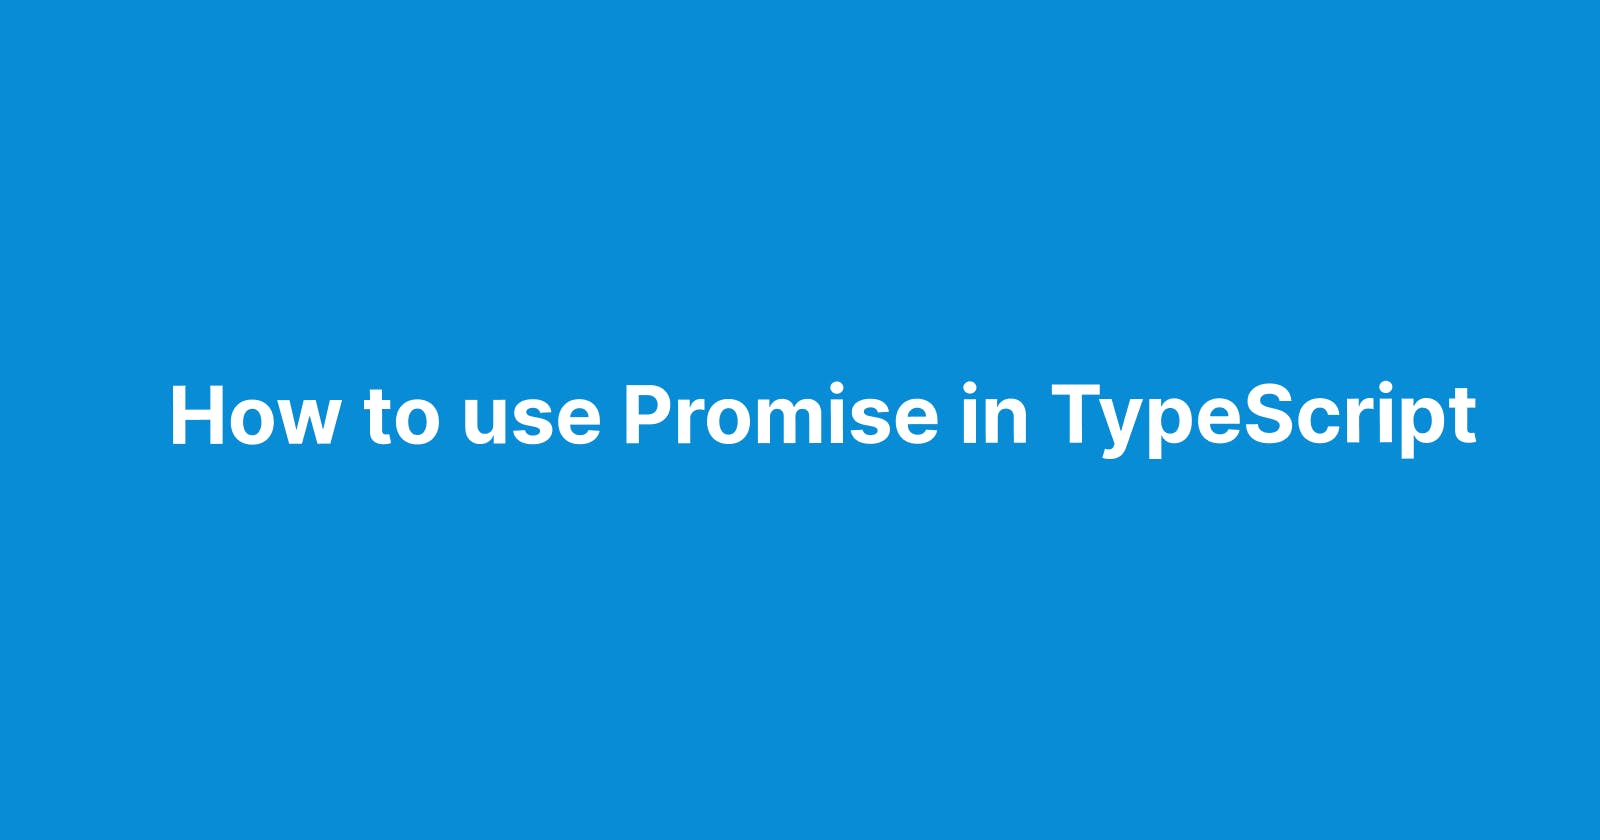 How to use Promise in TypeScript